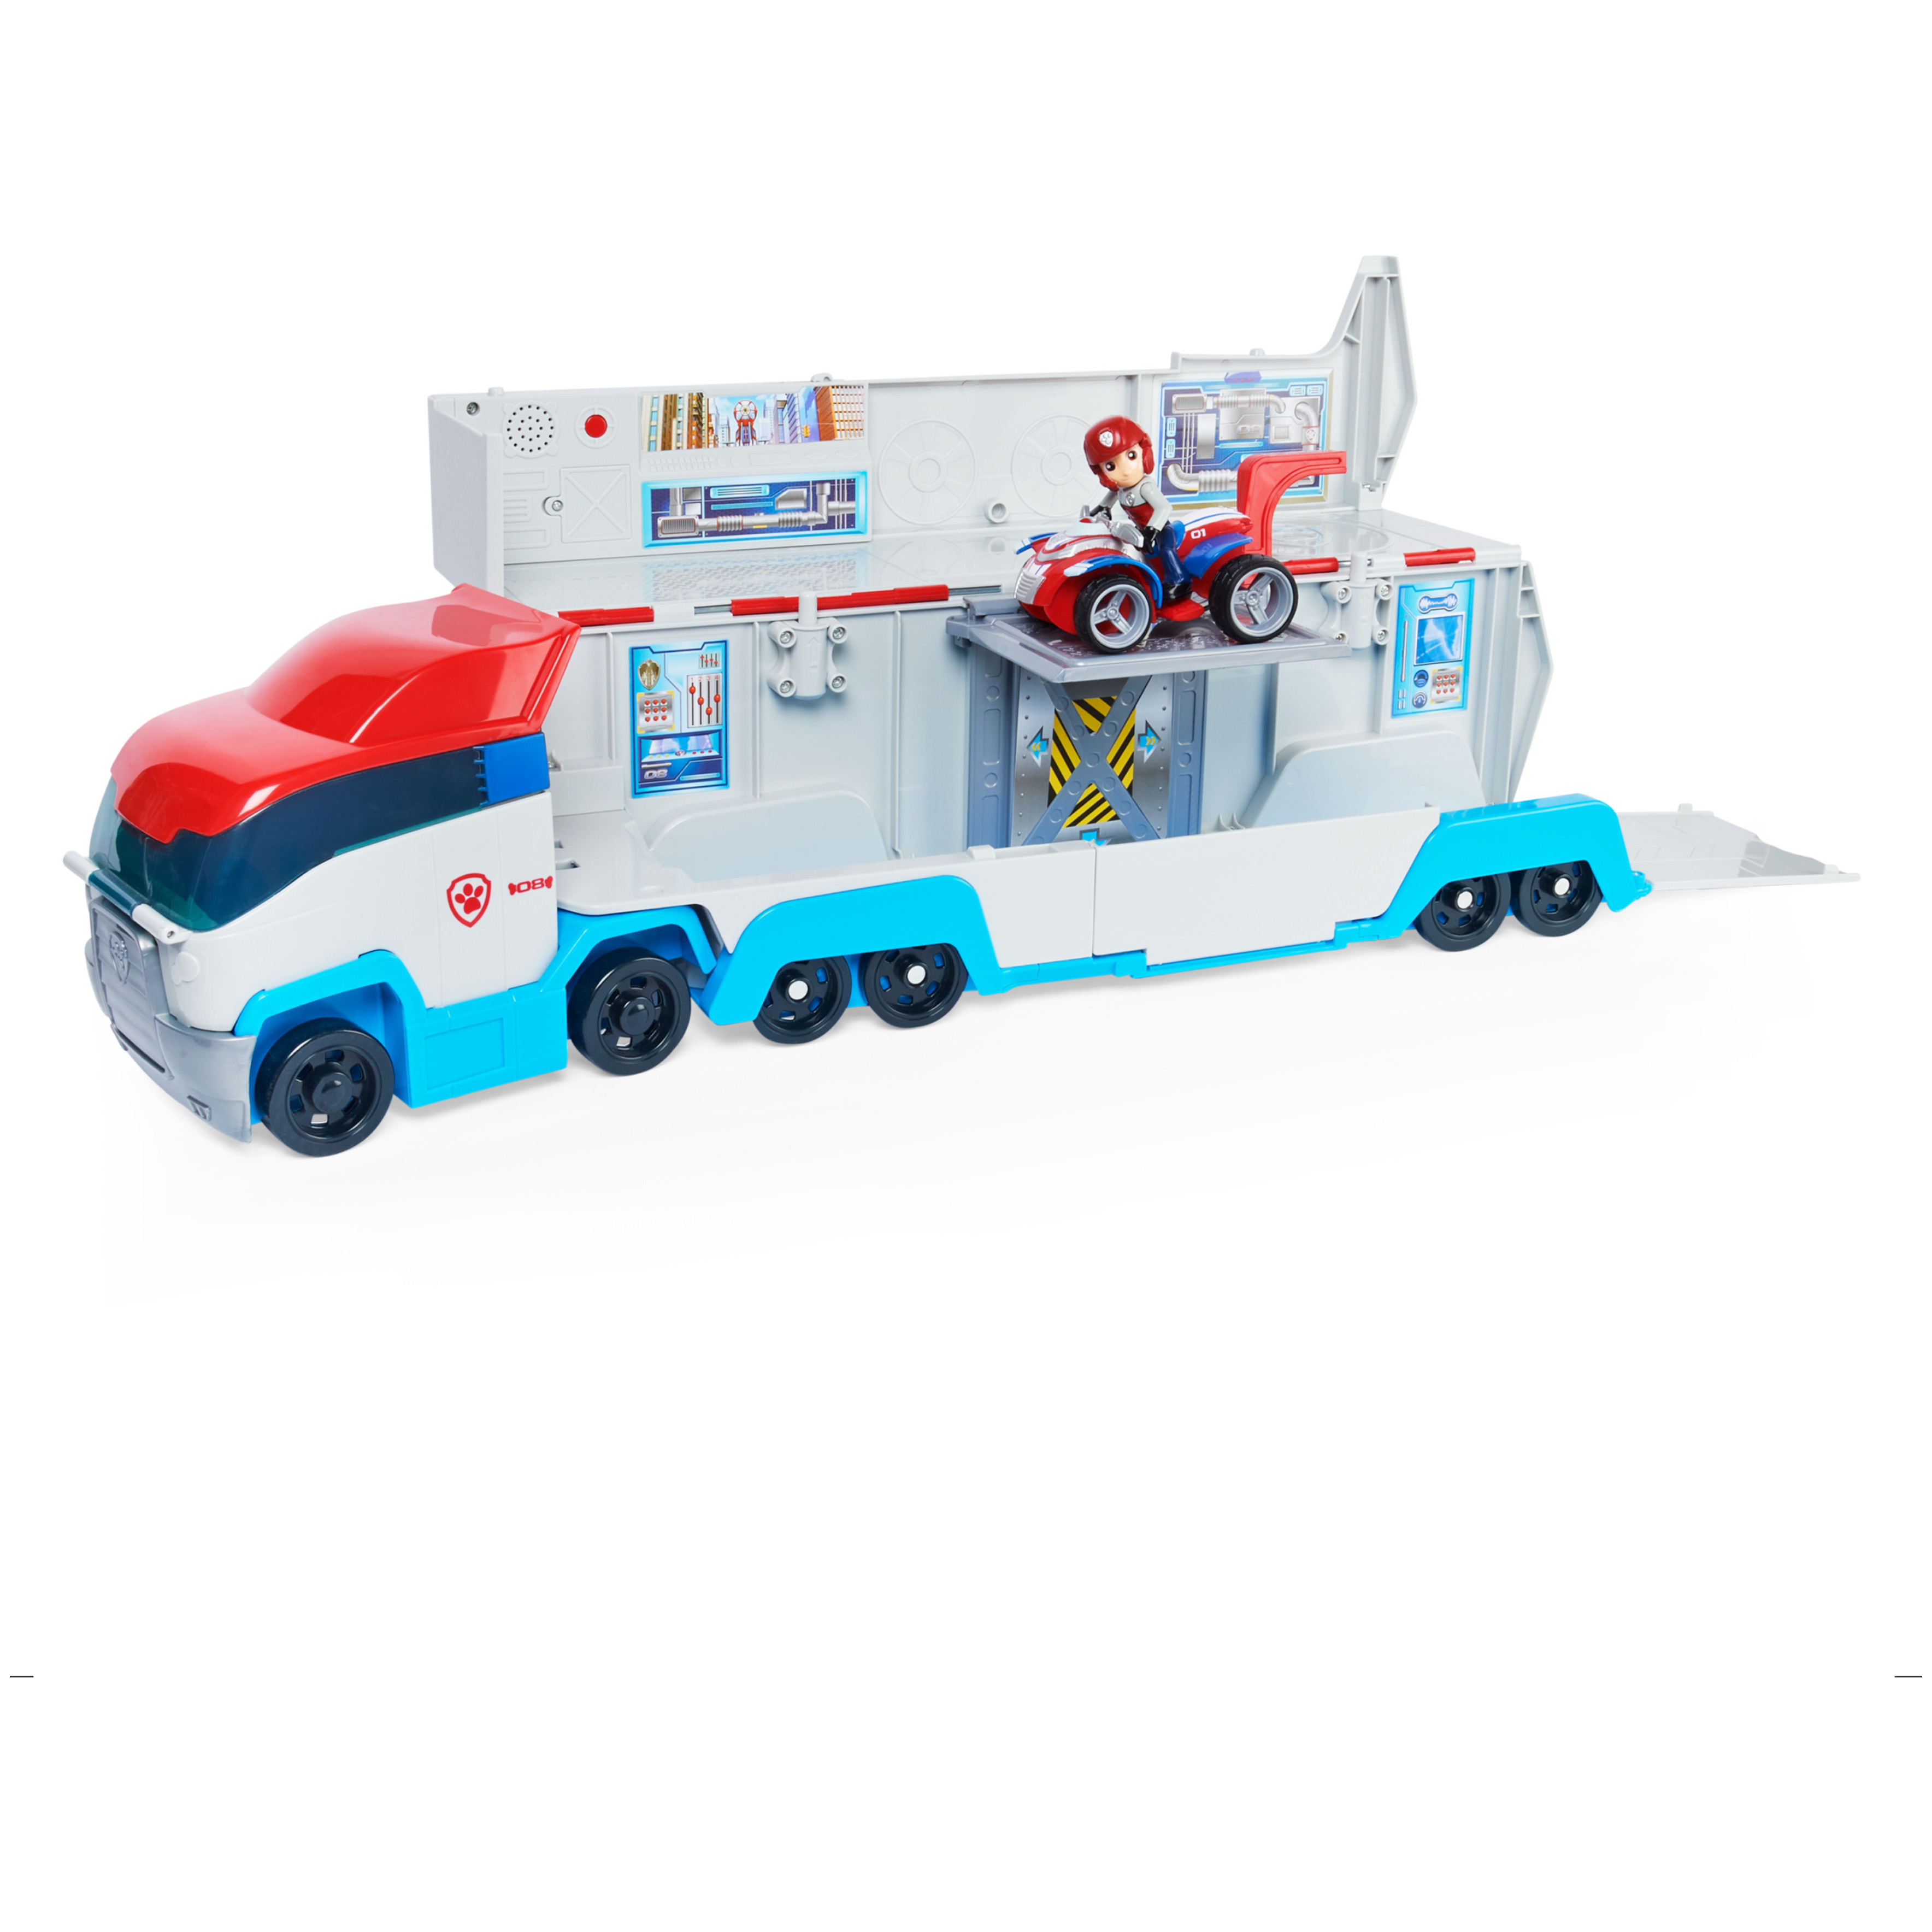 PAW Patrol, Transforming City PAW Patroller Vehicle (Walmart Exclusive), for Ages 3 and up - image 3 of 8